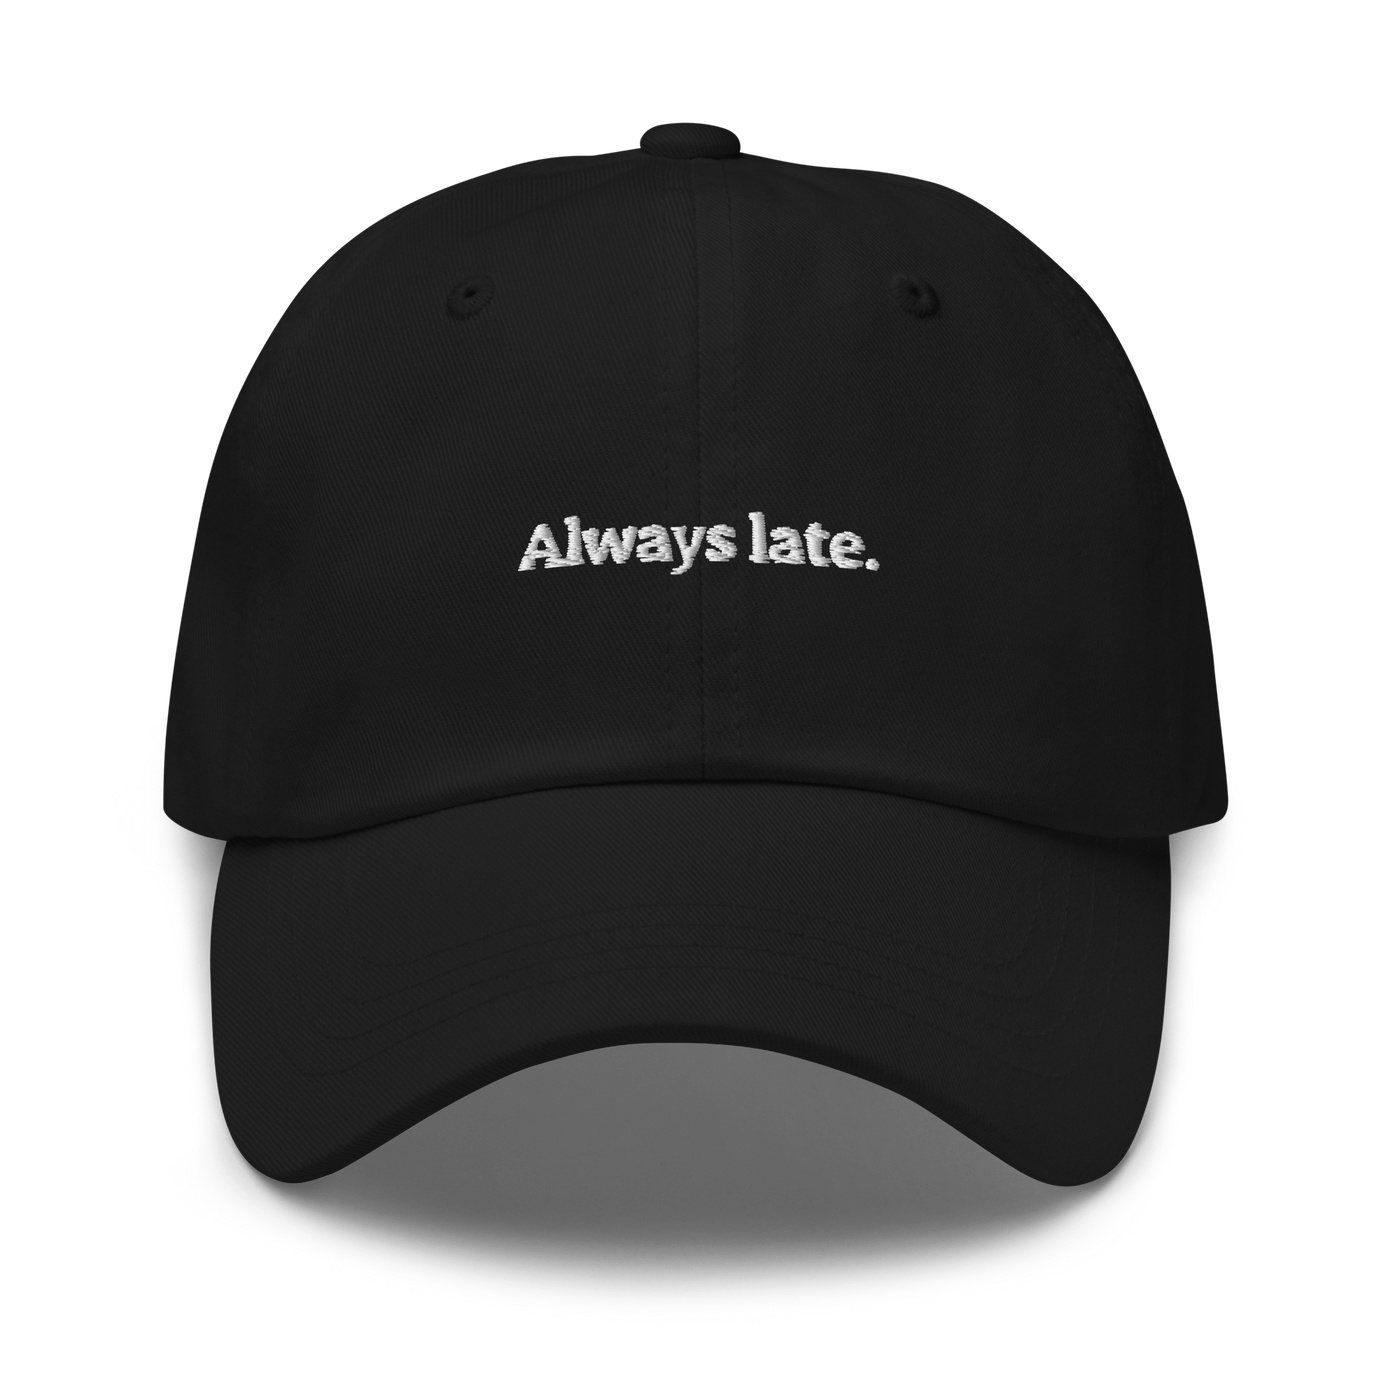 Always Late. Dad hat - Black - OUTLET - Just Another Cap Store